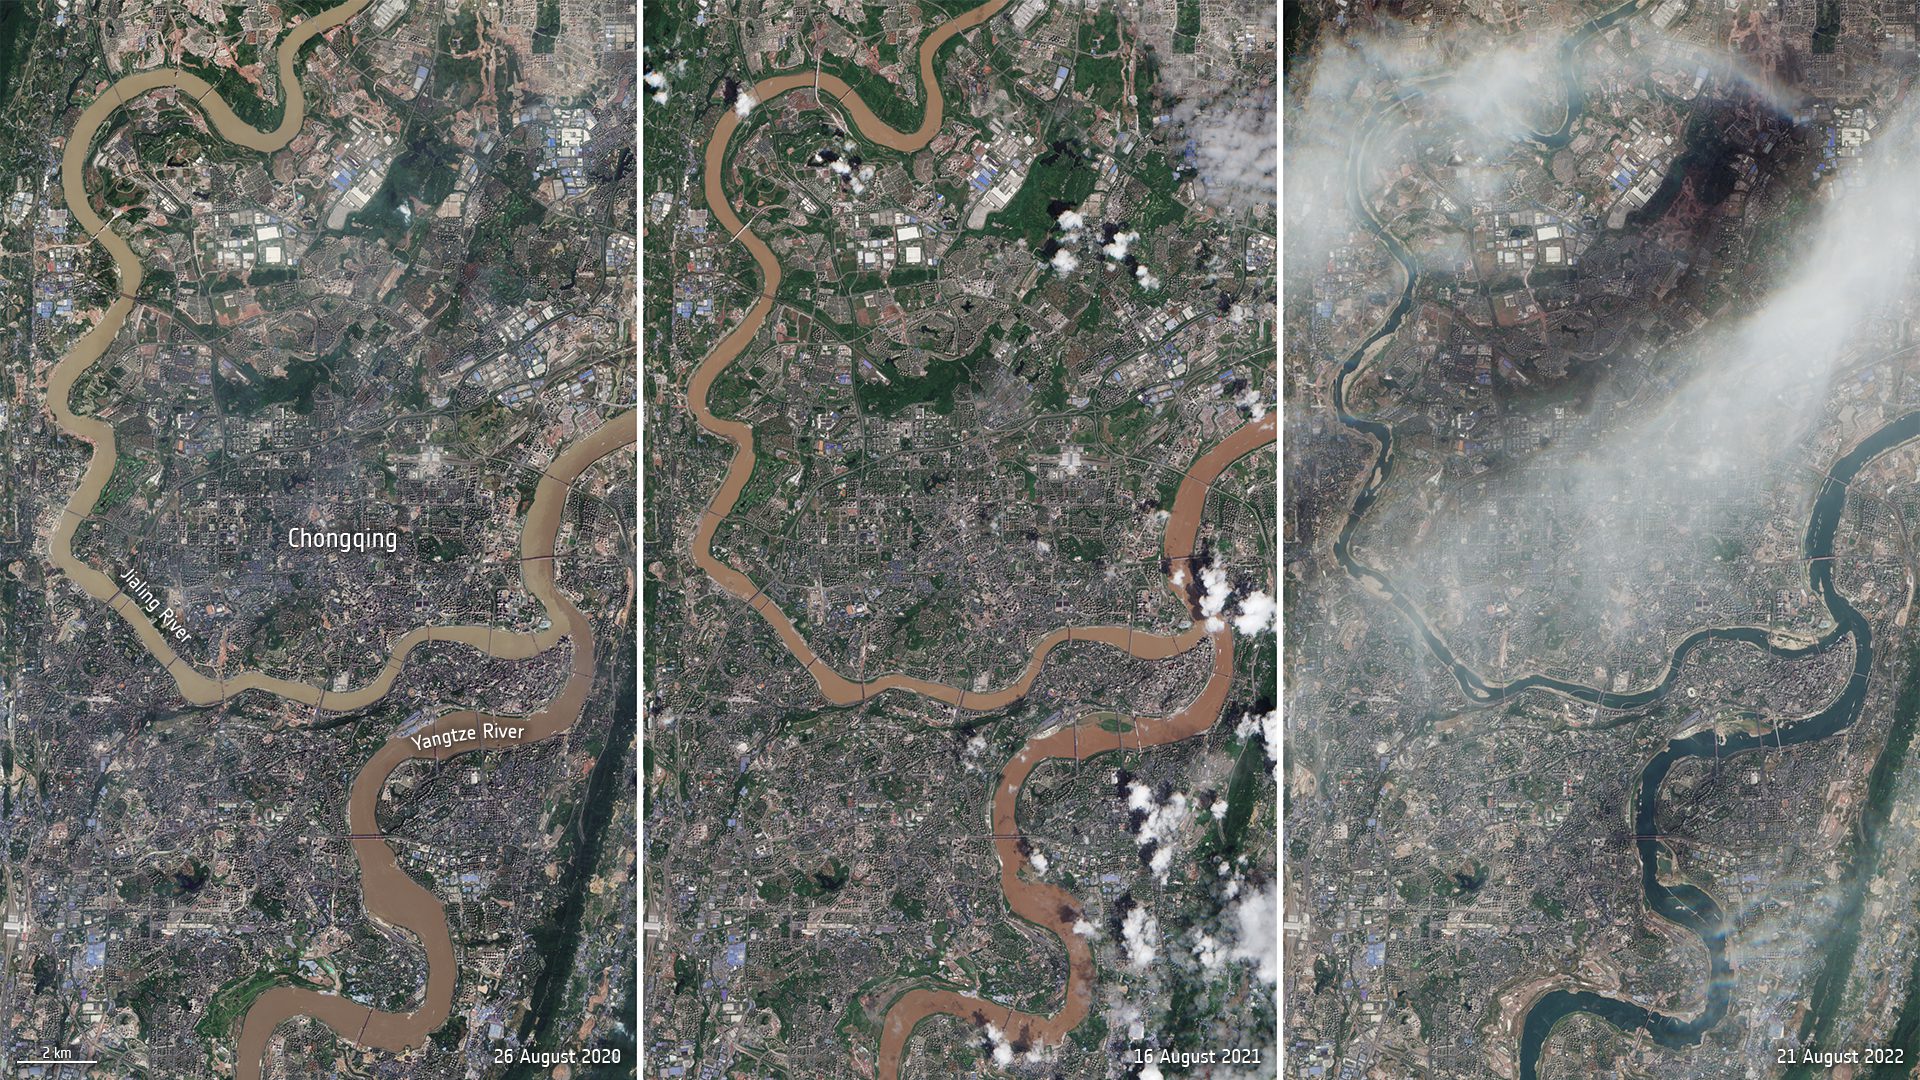 Views of the Yangtze and Jialing rivers over the last two years. Image Credit: 